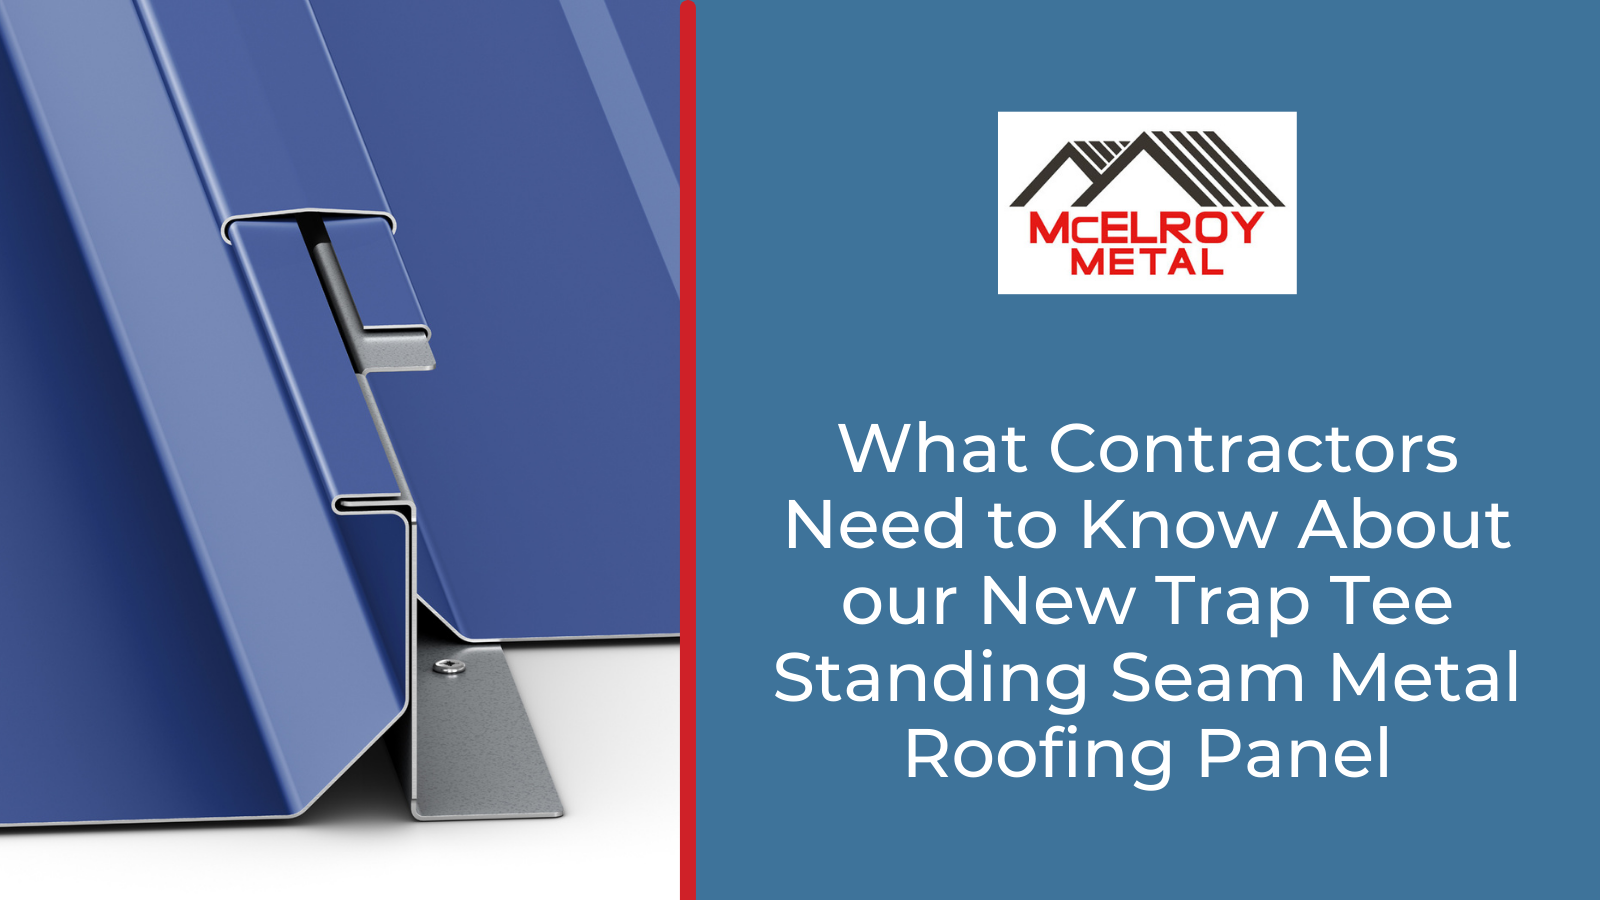 What Contractors Need to Know About our New Trap-Tee Standing Seam Metal Roofing Panel